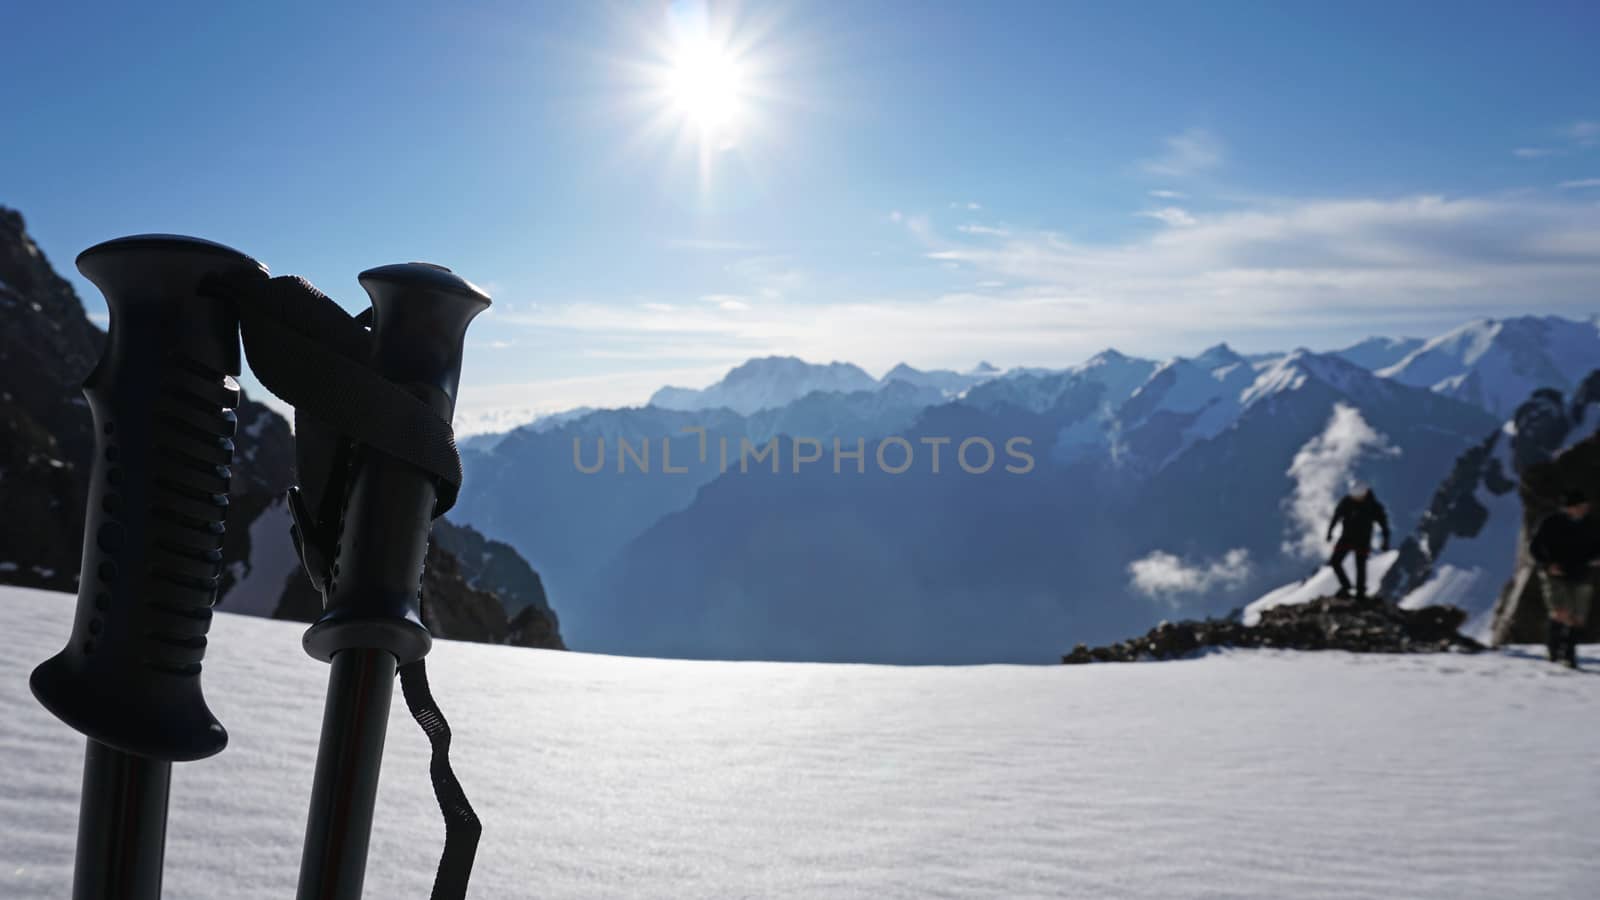 Trekking sticks on the background of snow peaks. The sun is shining brightly, white clouds and snow cliffs in the distance. Blue clear sky. Climbers are going to the top. Alpine camp in the mountains.